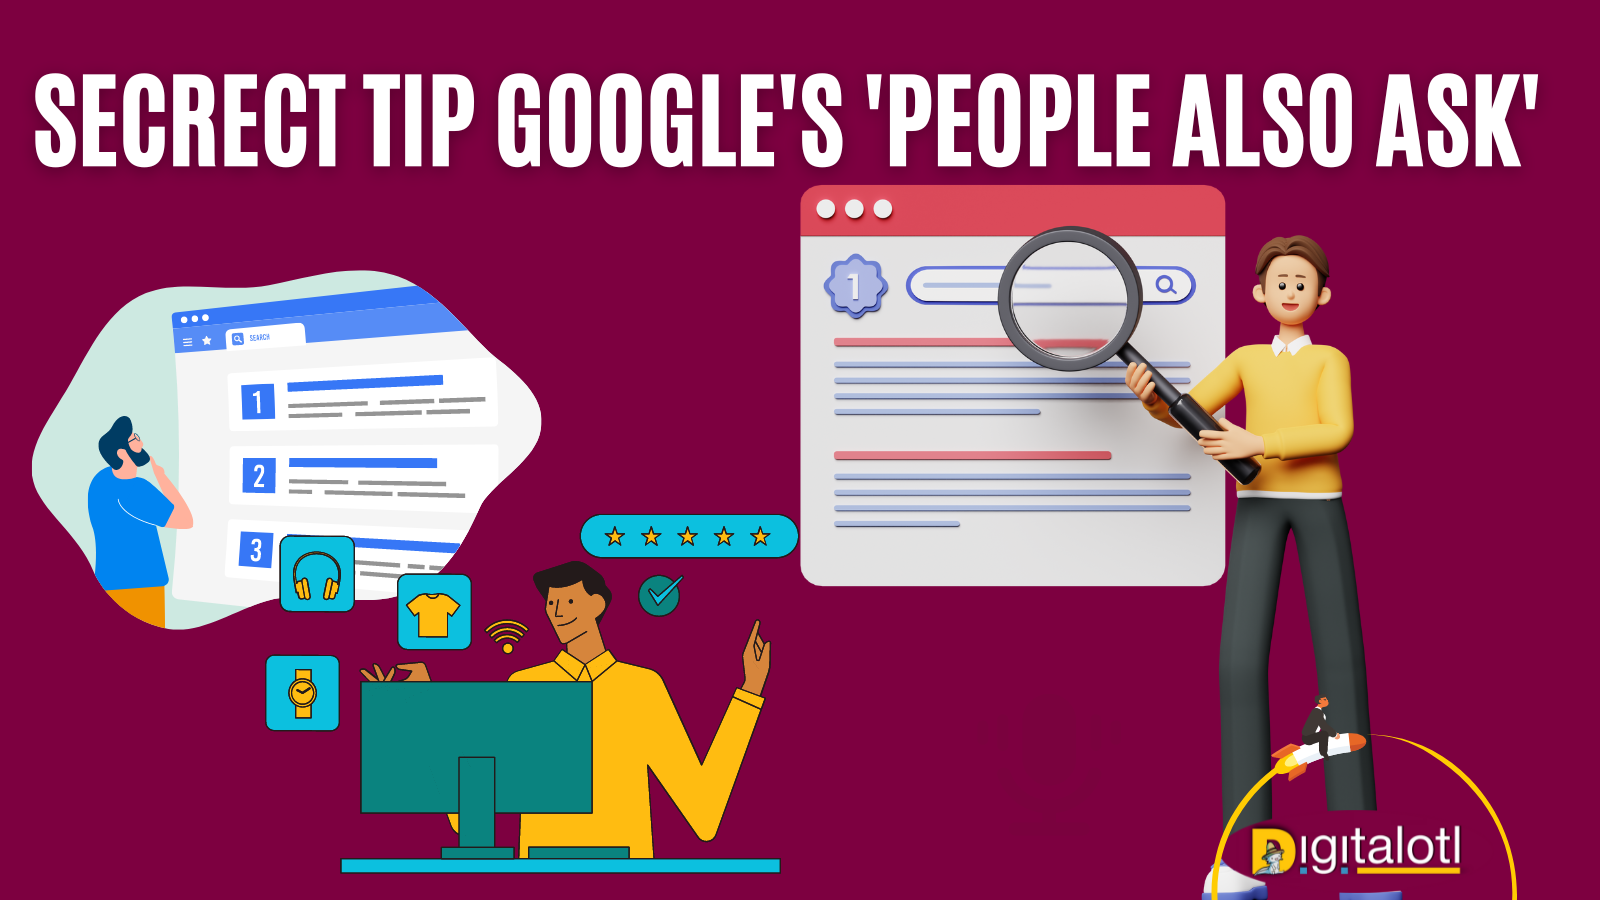 Secrect Tip Google's 'People also ask'